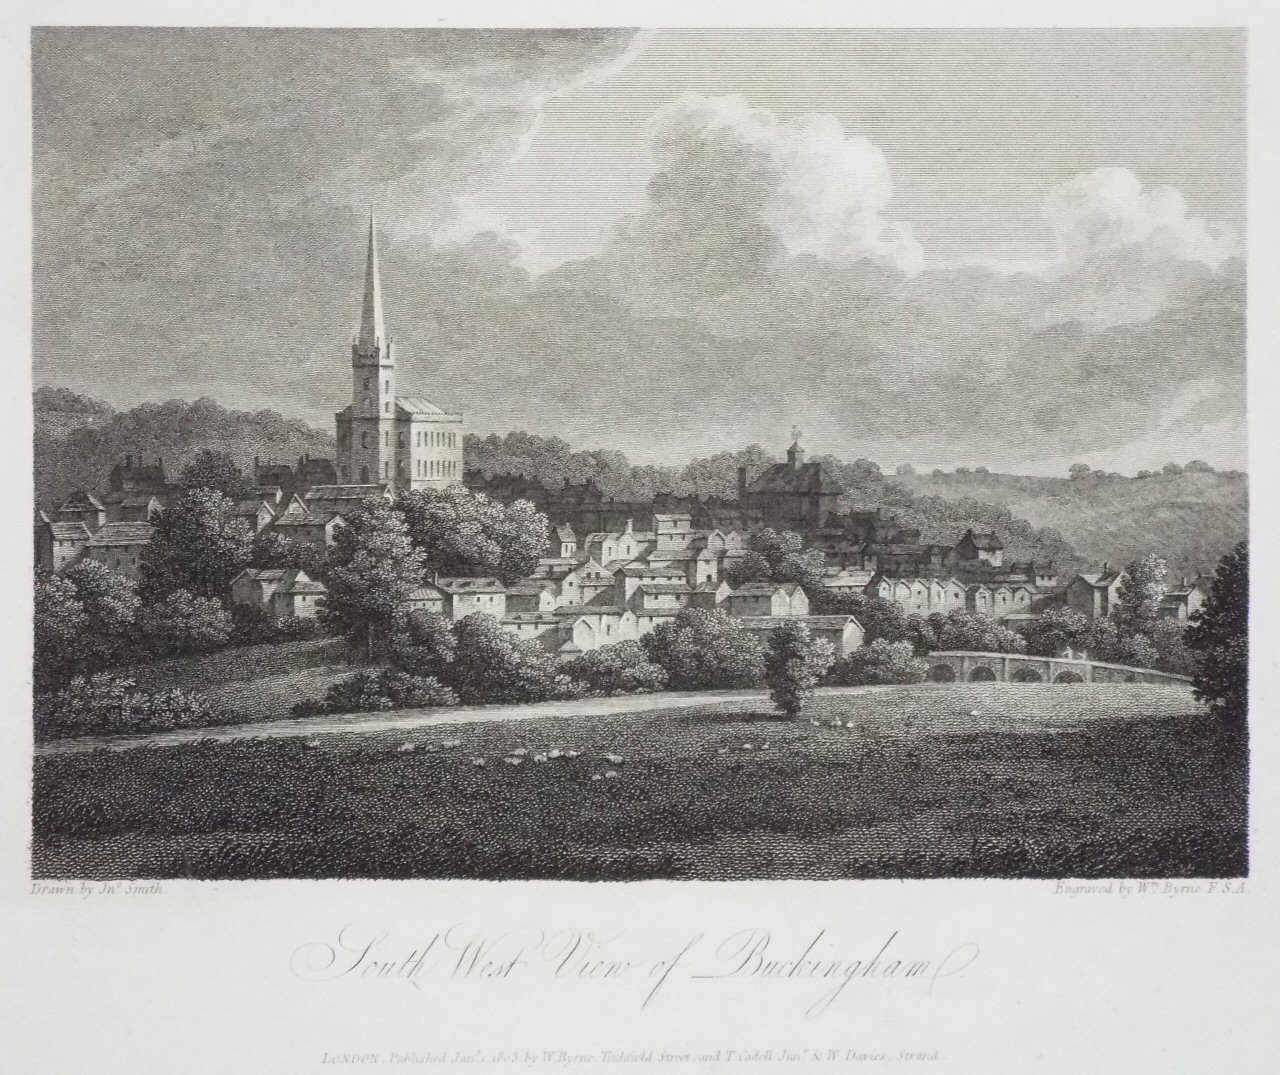 Print - South West View of Buckingham. - Byrne